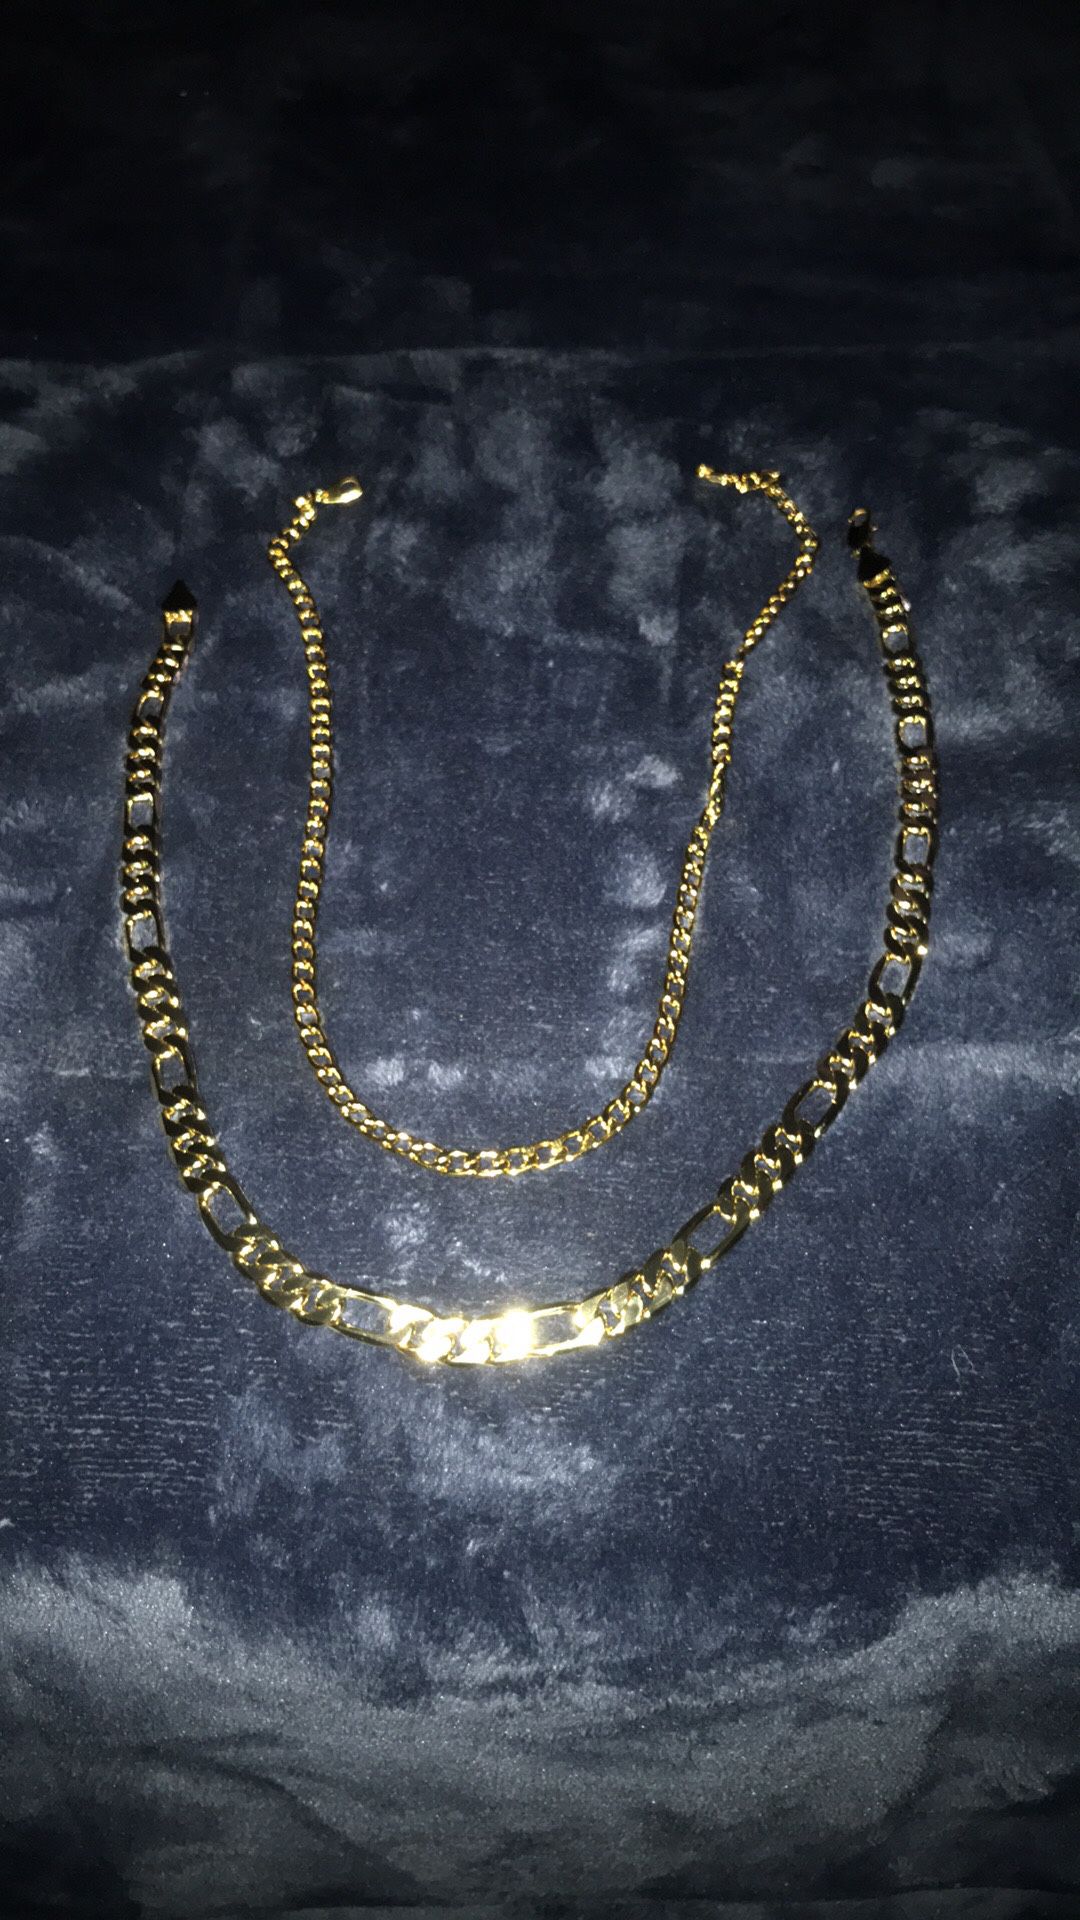 Gold filled chains 22 inches